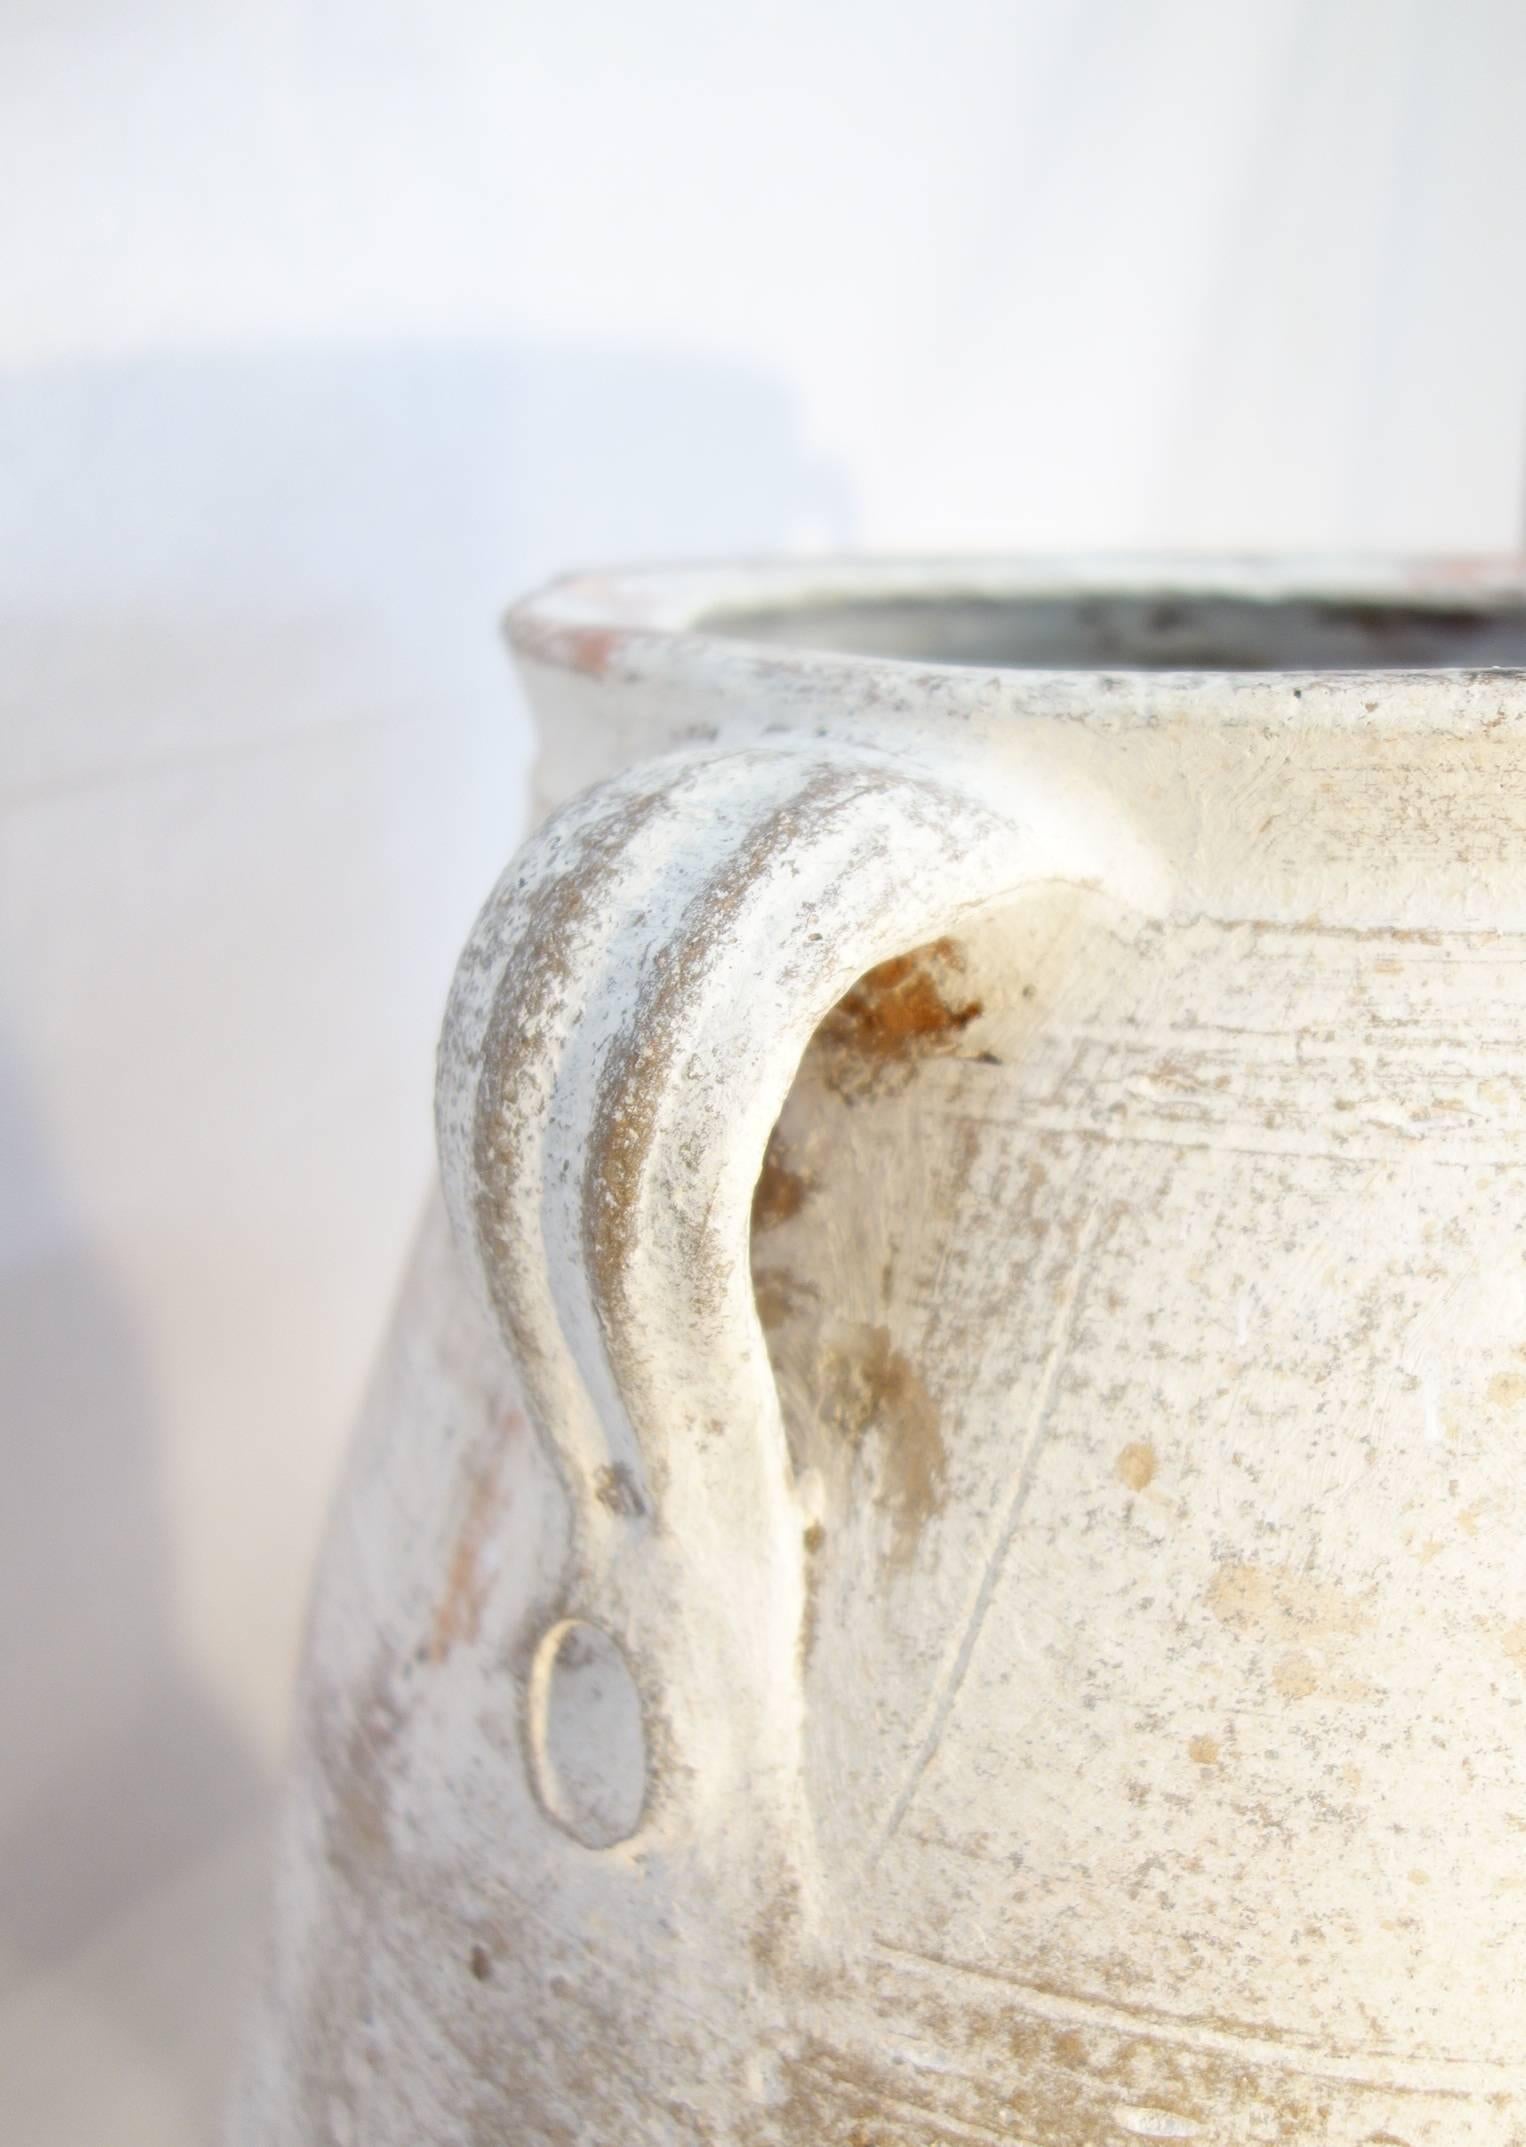 Mediterranean antique pottery Amphora, wonderful white lime patina, it was once used as storage and shipping jars for wine, olive oil, or various types of vegetable.

Dimensions are 26